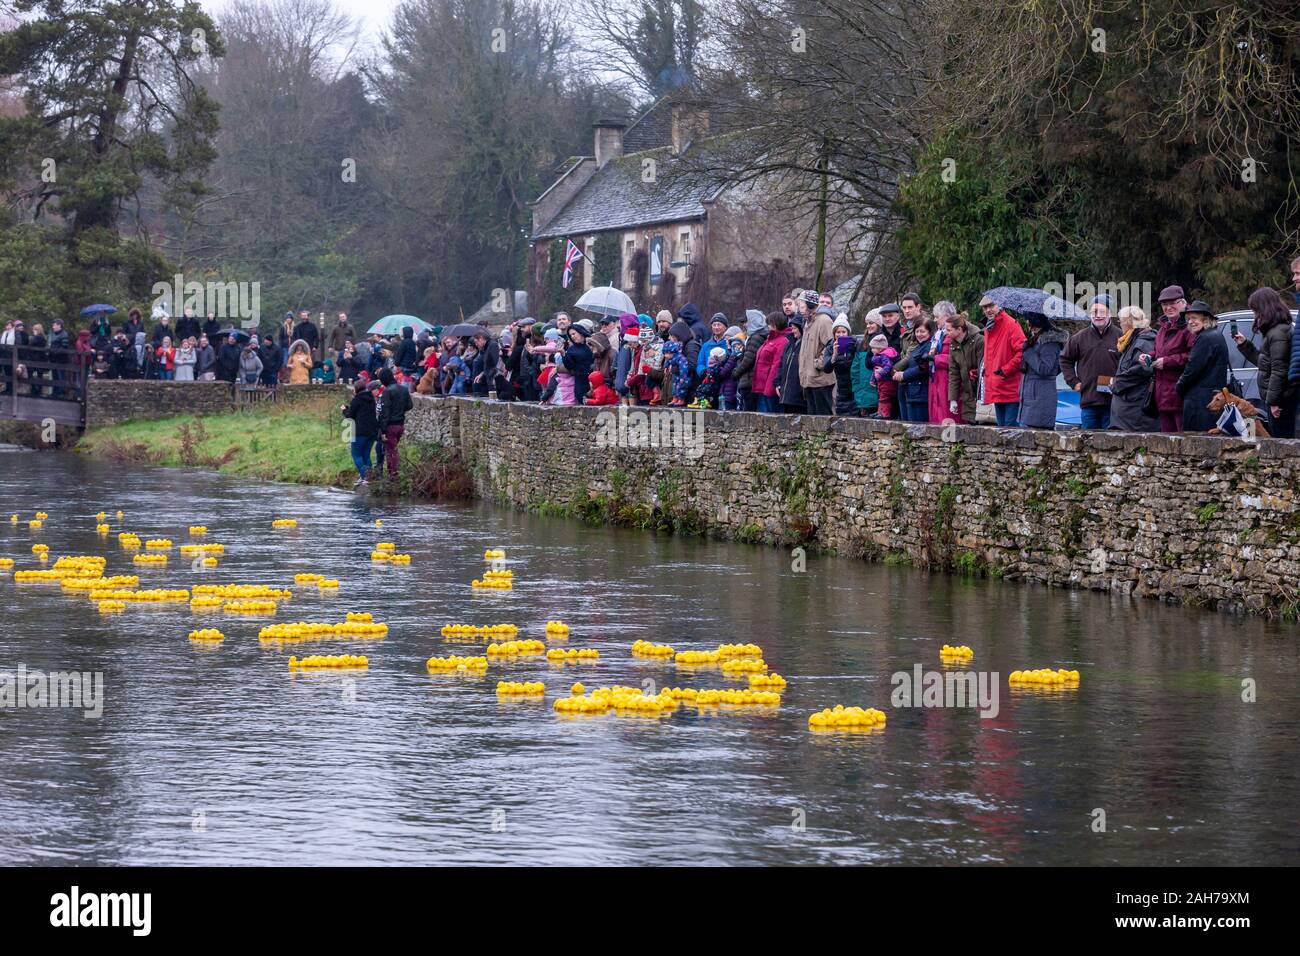 Bibury, Gloucestershire, 26th January 2019, Bibury’s annual Boxing day charity Duck race on the River Coln on a wet soggy morning, the first race is 150 racing duck started at 1100 hrs which people sponsor for £10.00 each and the winning sponsor nominates which charity they would like the total sum raised to go to, the even draws crowds of people to watch with more than 2,000 rubber ducks upon the river during the event, which is organised by the Bibury Cricket Club. Credit: Keith J Smith./Alamy Live News Stock Photo